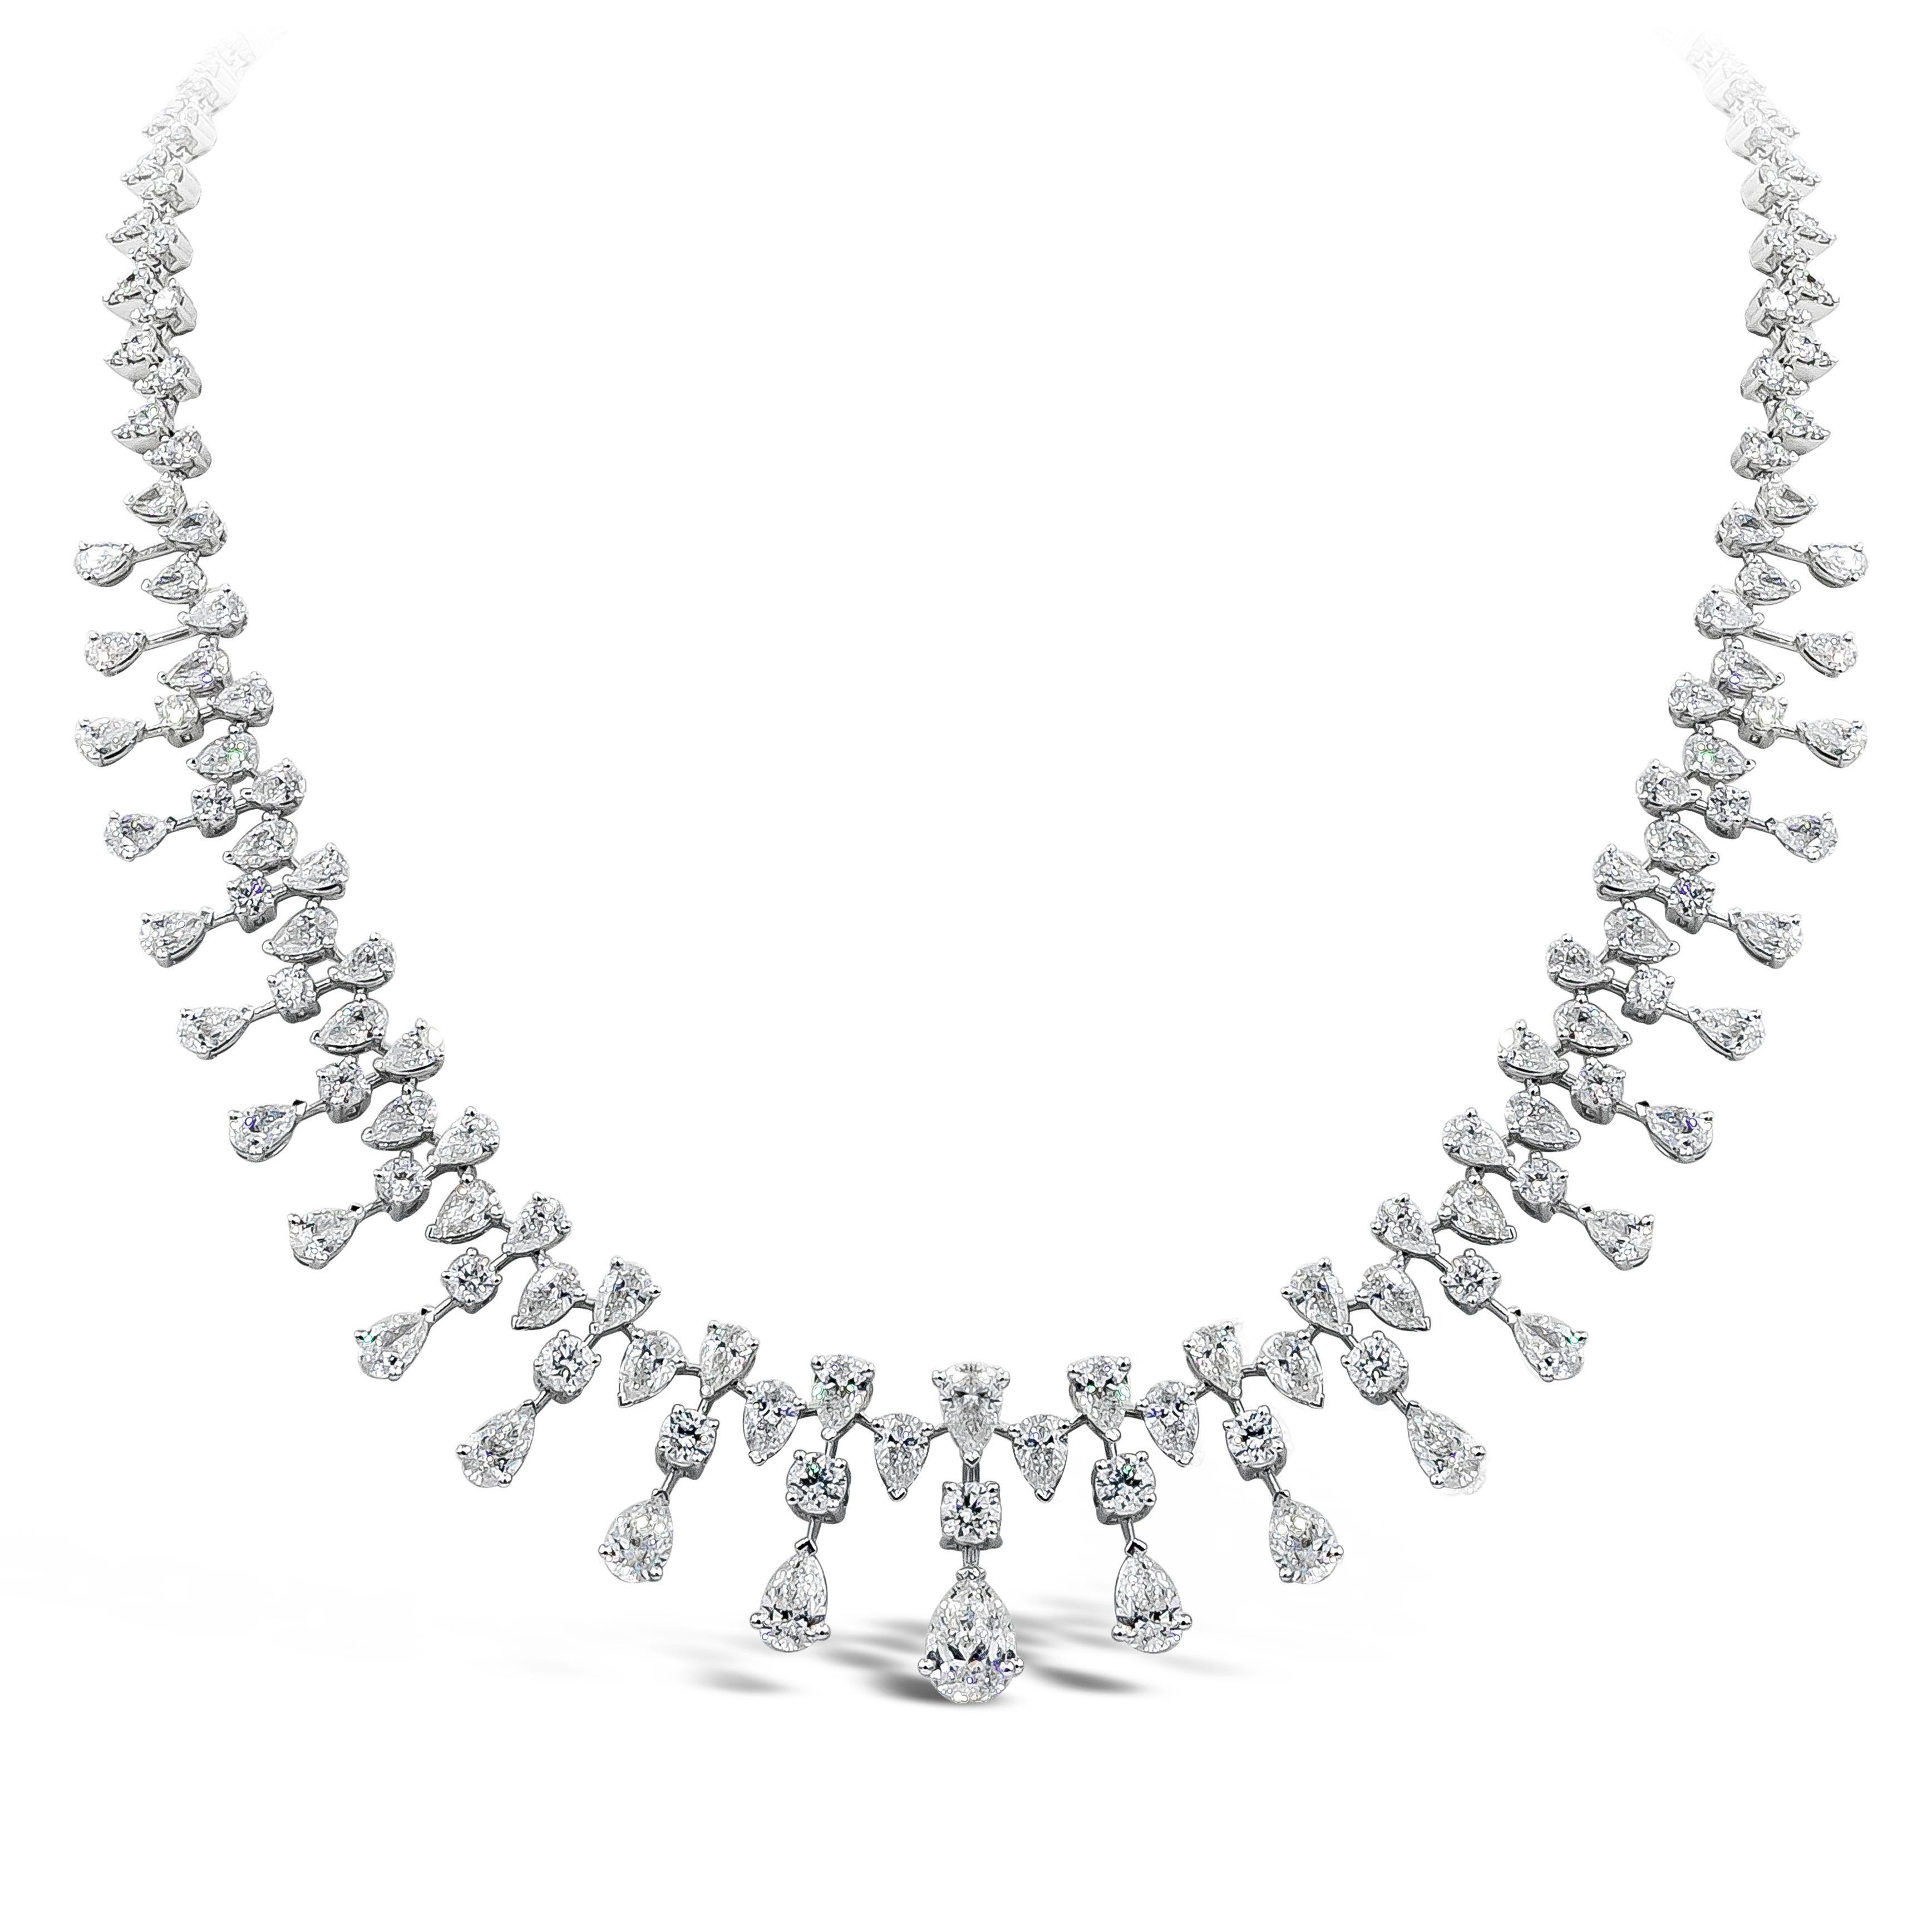 A gorgeous, important and intricately designed necklace showcasing round and pear shaped diamonds weighing 25.60 carats total. Each diamond fringe graduates in size as it gets to the center of the necklace and is spaced by graduating pear shaped